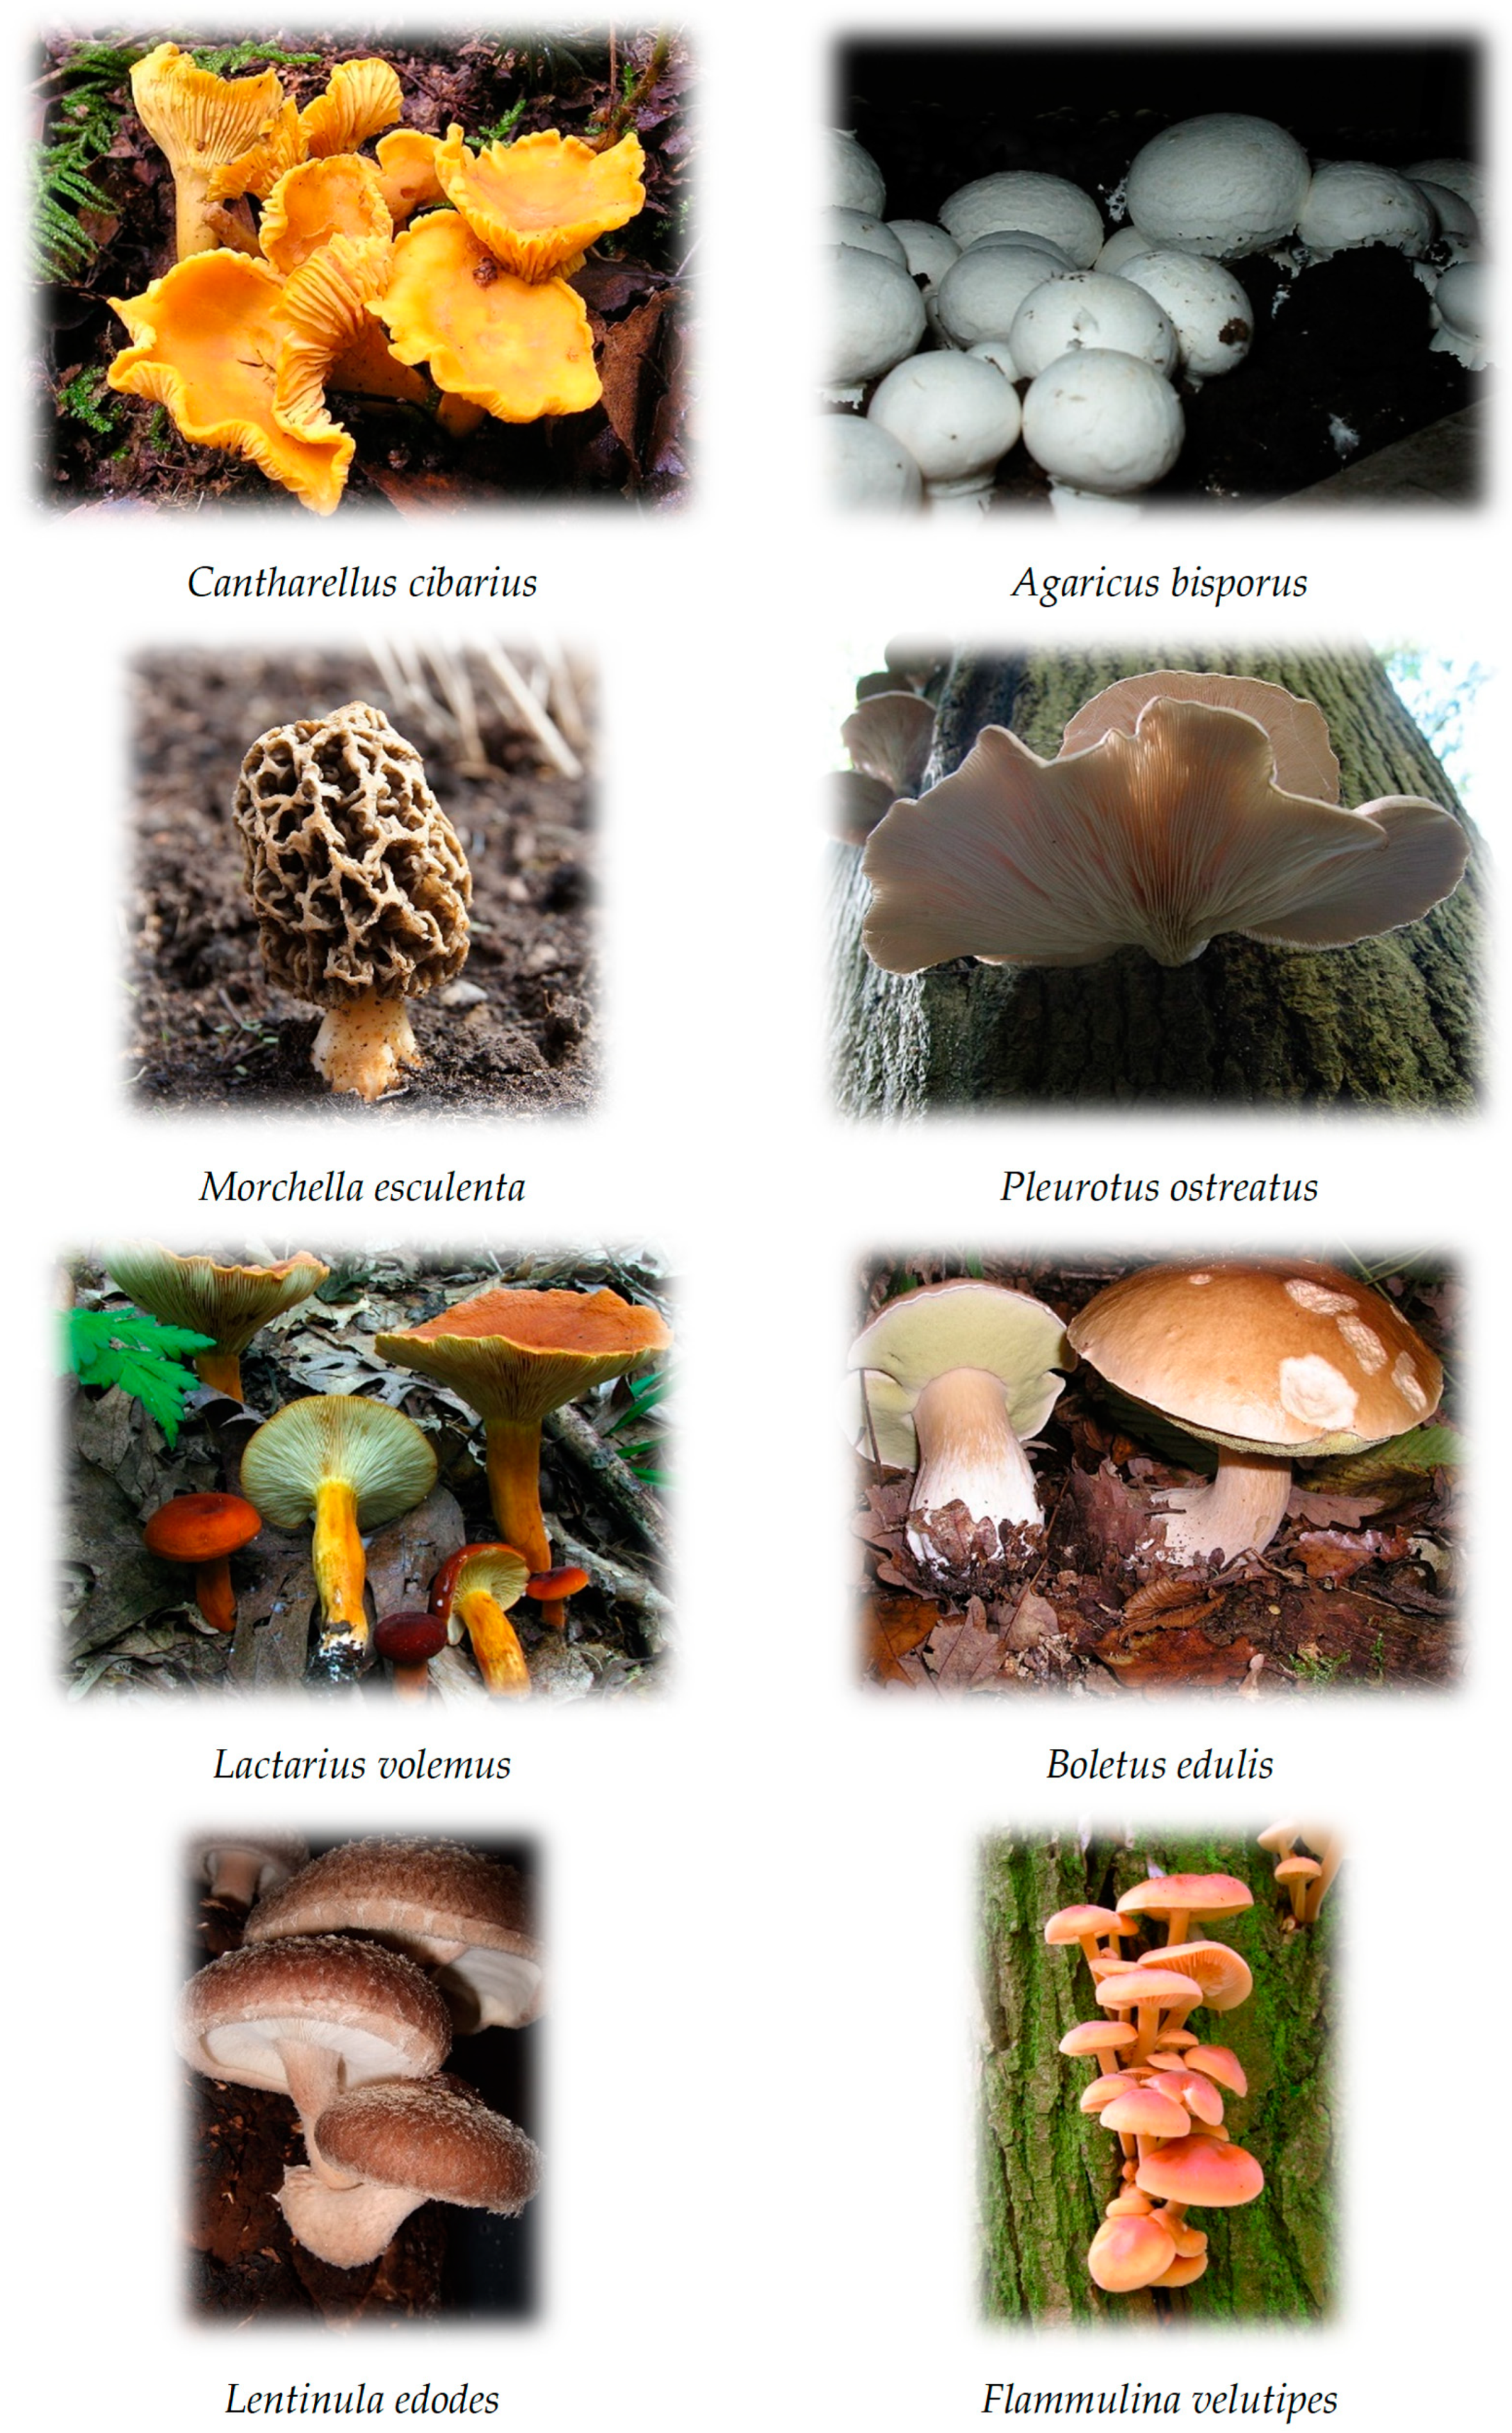 Mushrooms as future generation healthy foods. - Abstract - Europe PMC